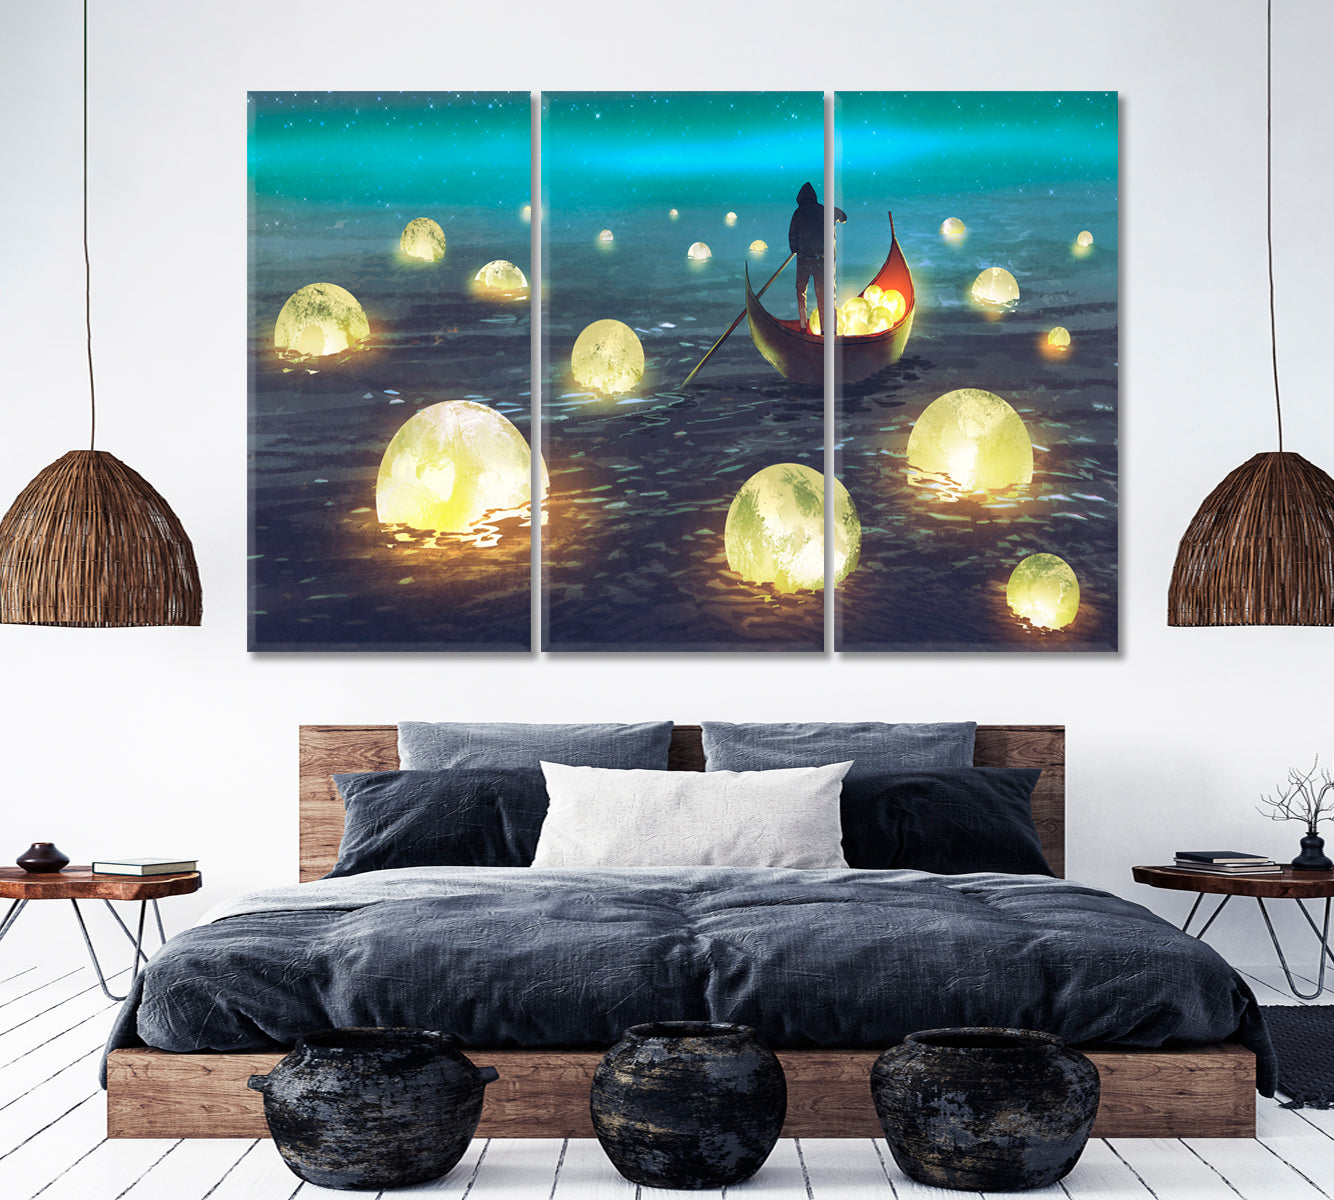 SURREAL Night Scenery Man Rowing Boat Glowing Moons Floating Sea Surreal Fantasy Large Art Print Décor Artesty 3 panels 36" x 24" 